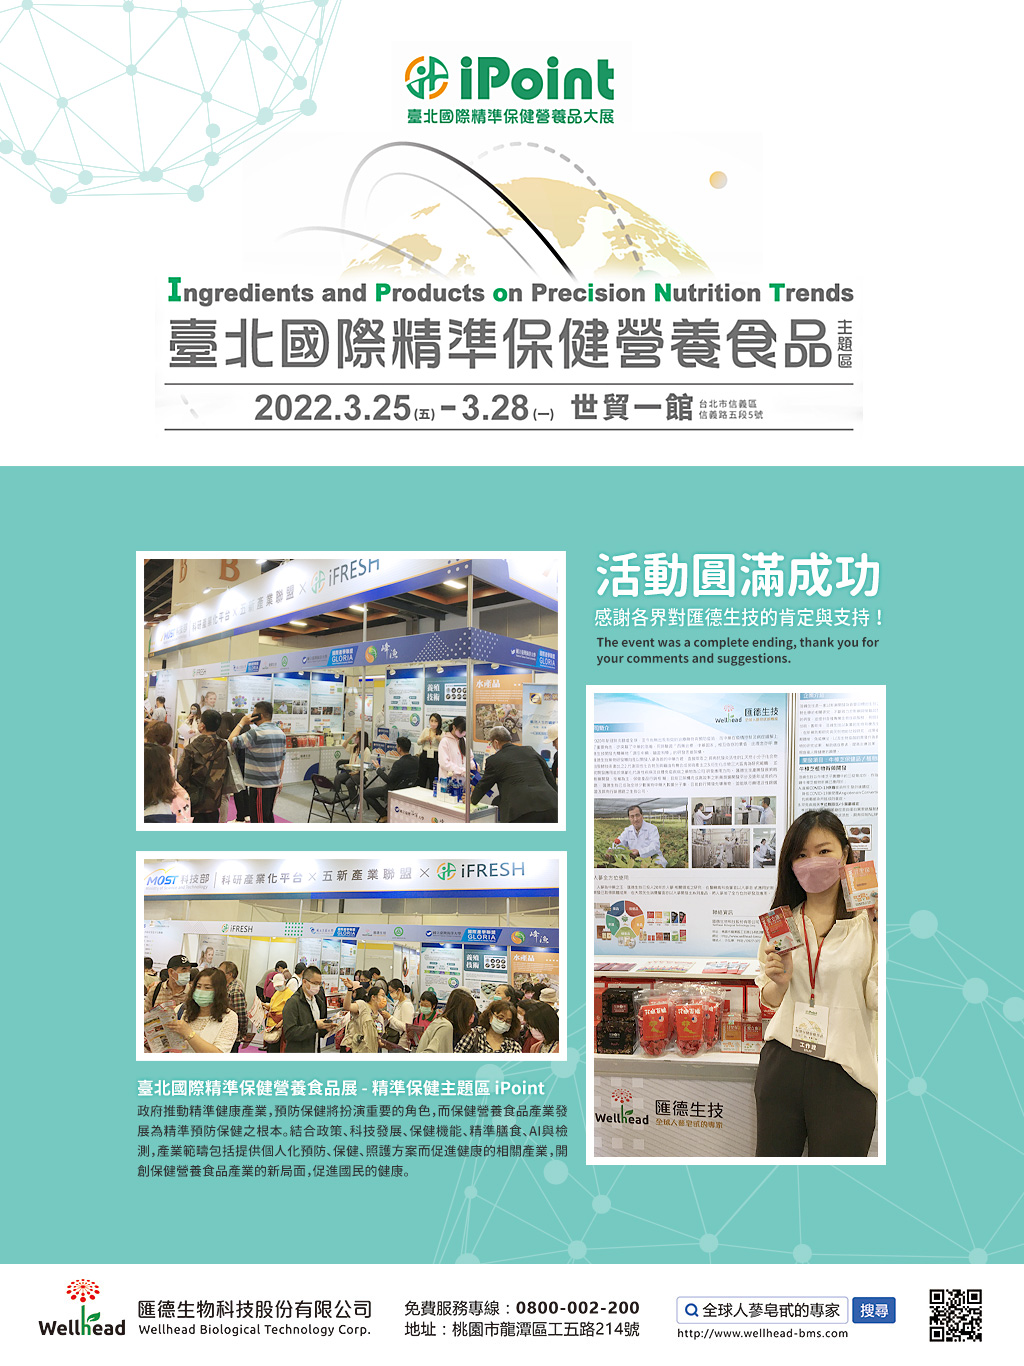 [ 2022 Ingredients and Products on Precision Nutrition Trends ] The expo had a successful ending, having wonderful tidbits